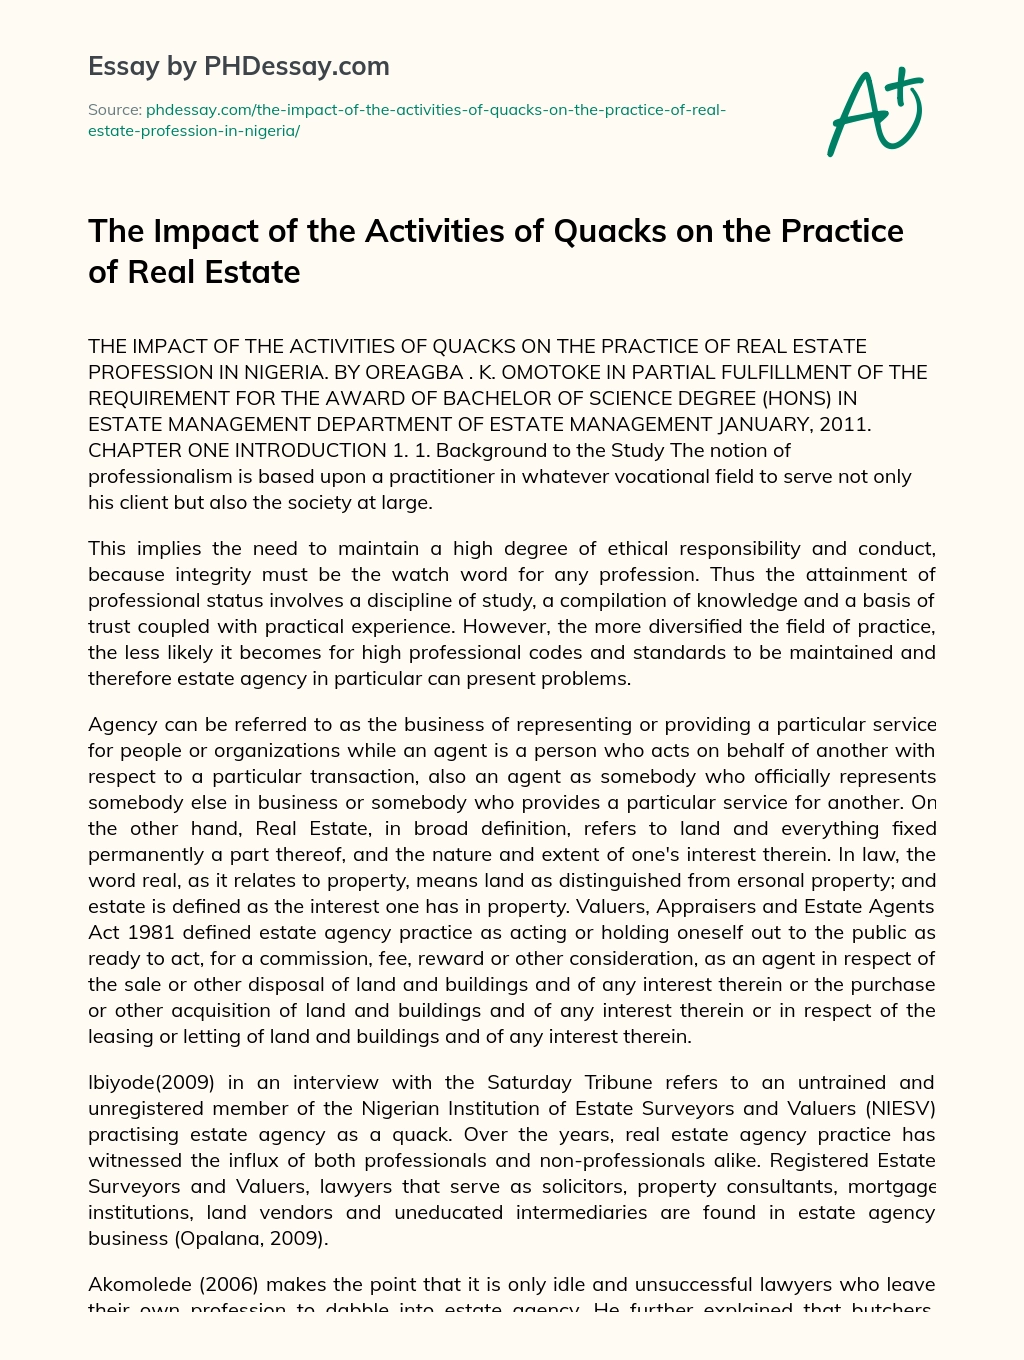 The Impact of the Activities of Quacks on the Practice of Real Estate essay